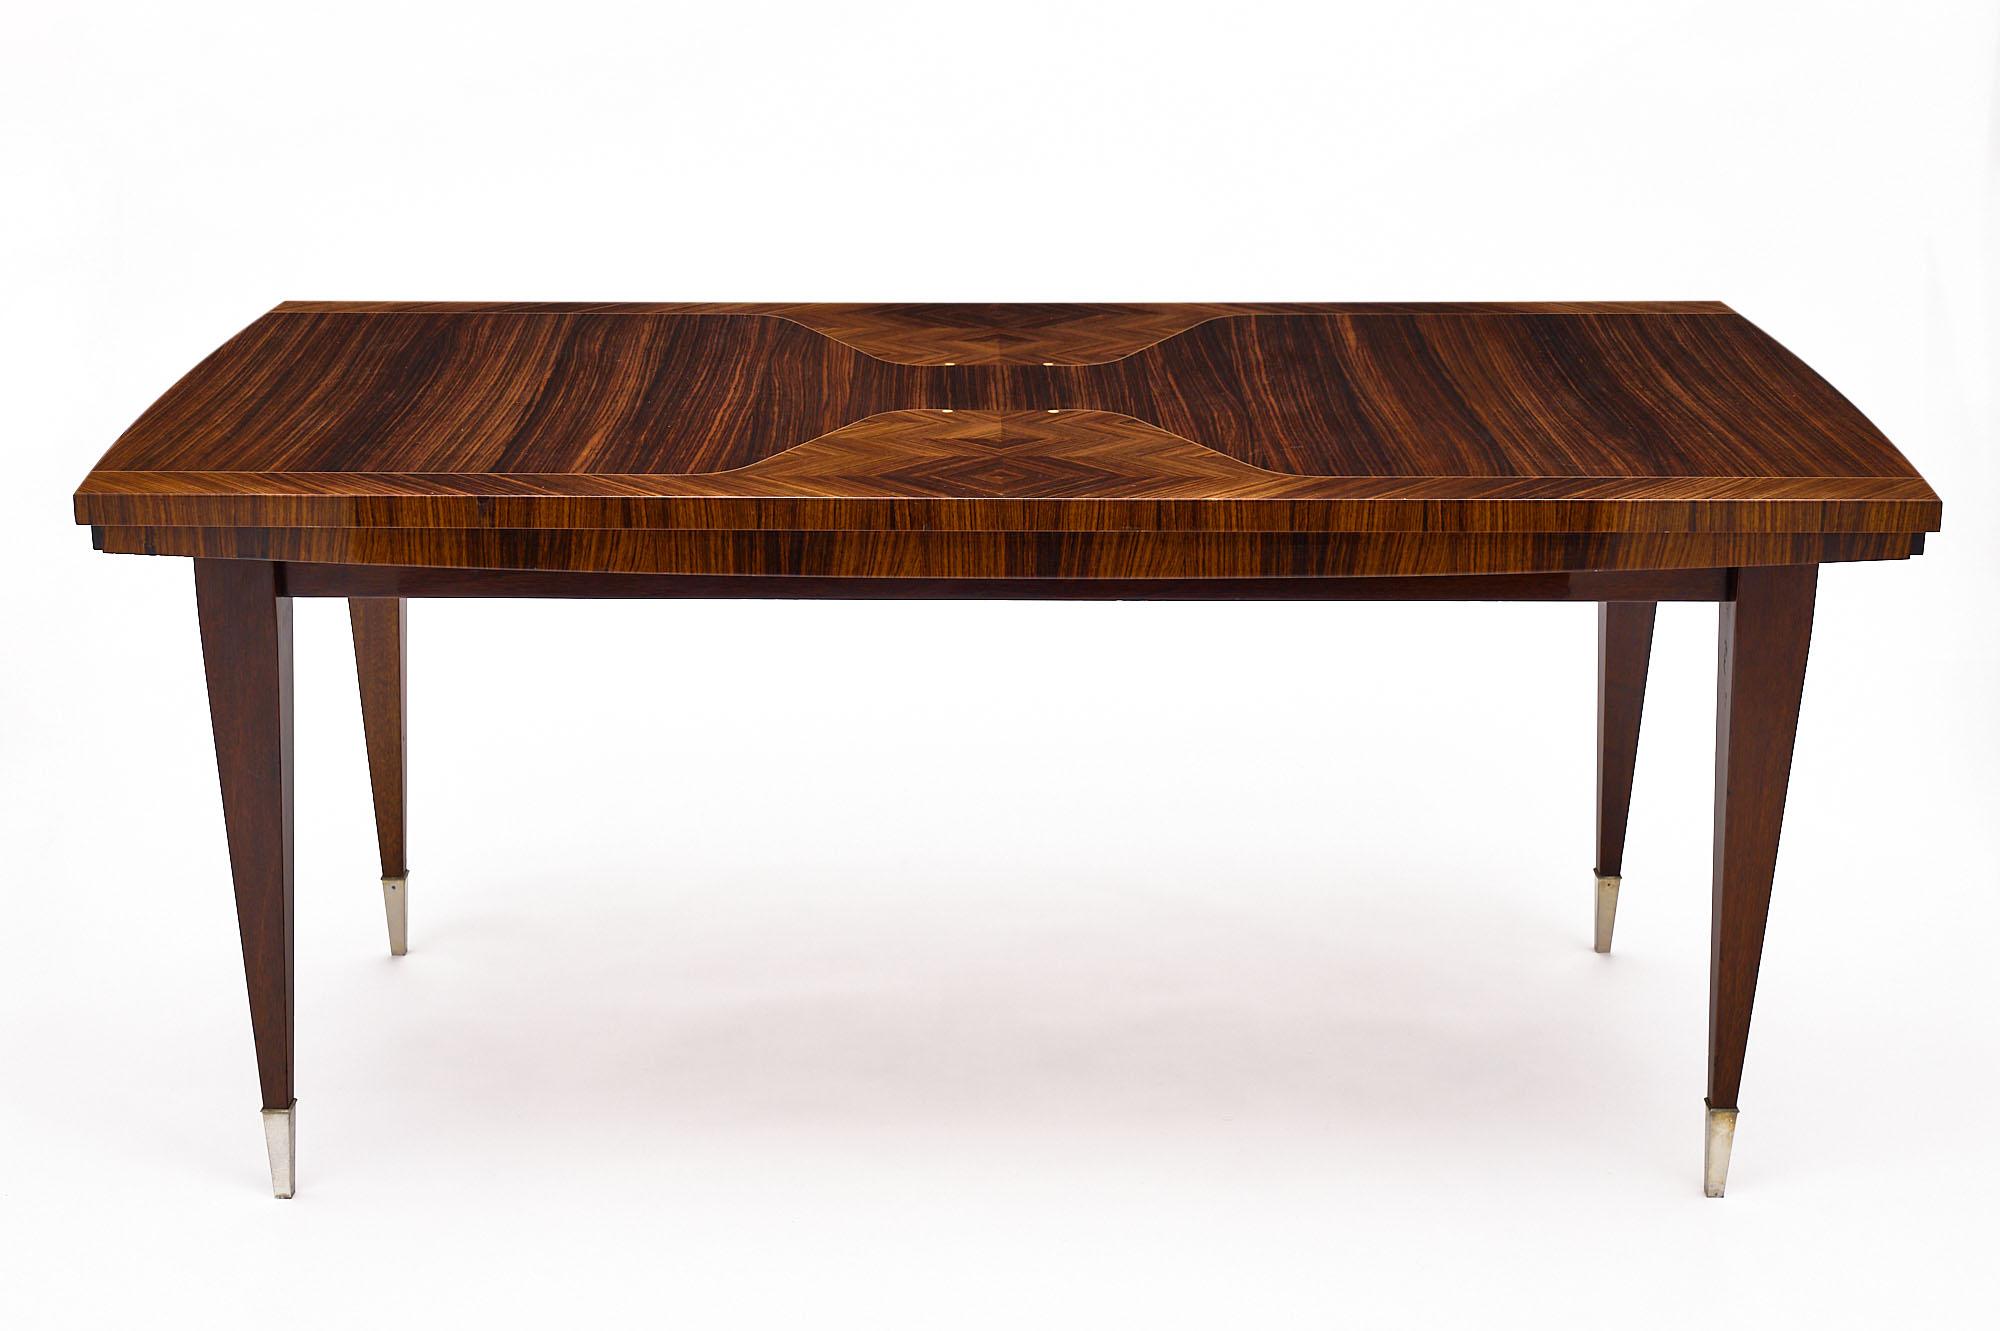 Dining room table from France. This vintage piece in the Modernist style is made of rare Macassar of ebony wood veneer with lemon wood inlays. We love the tapered legs featuring brass feet. There are pulls for leaves; though the leaves are not